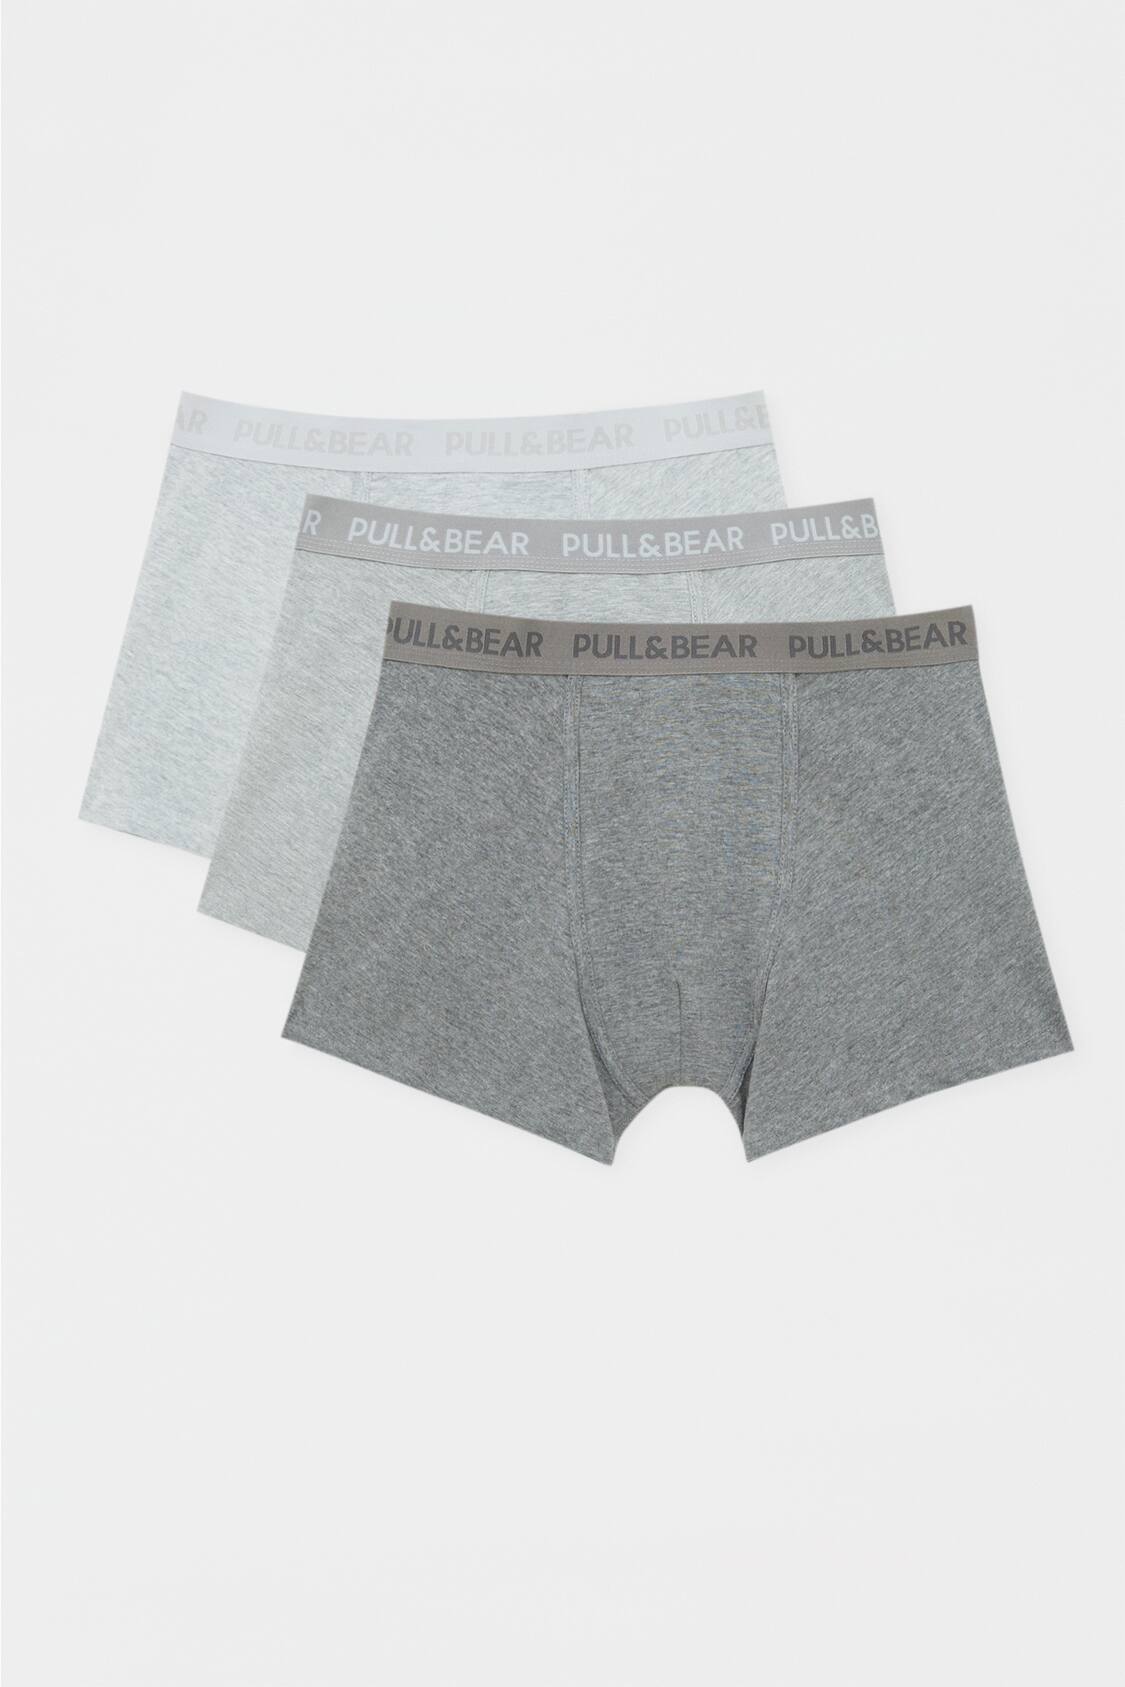 Pack of 3 grey boxers - PULL&BEAR